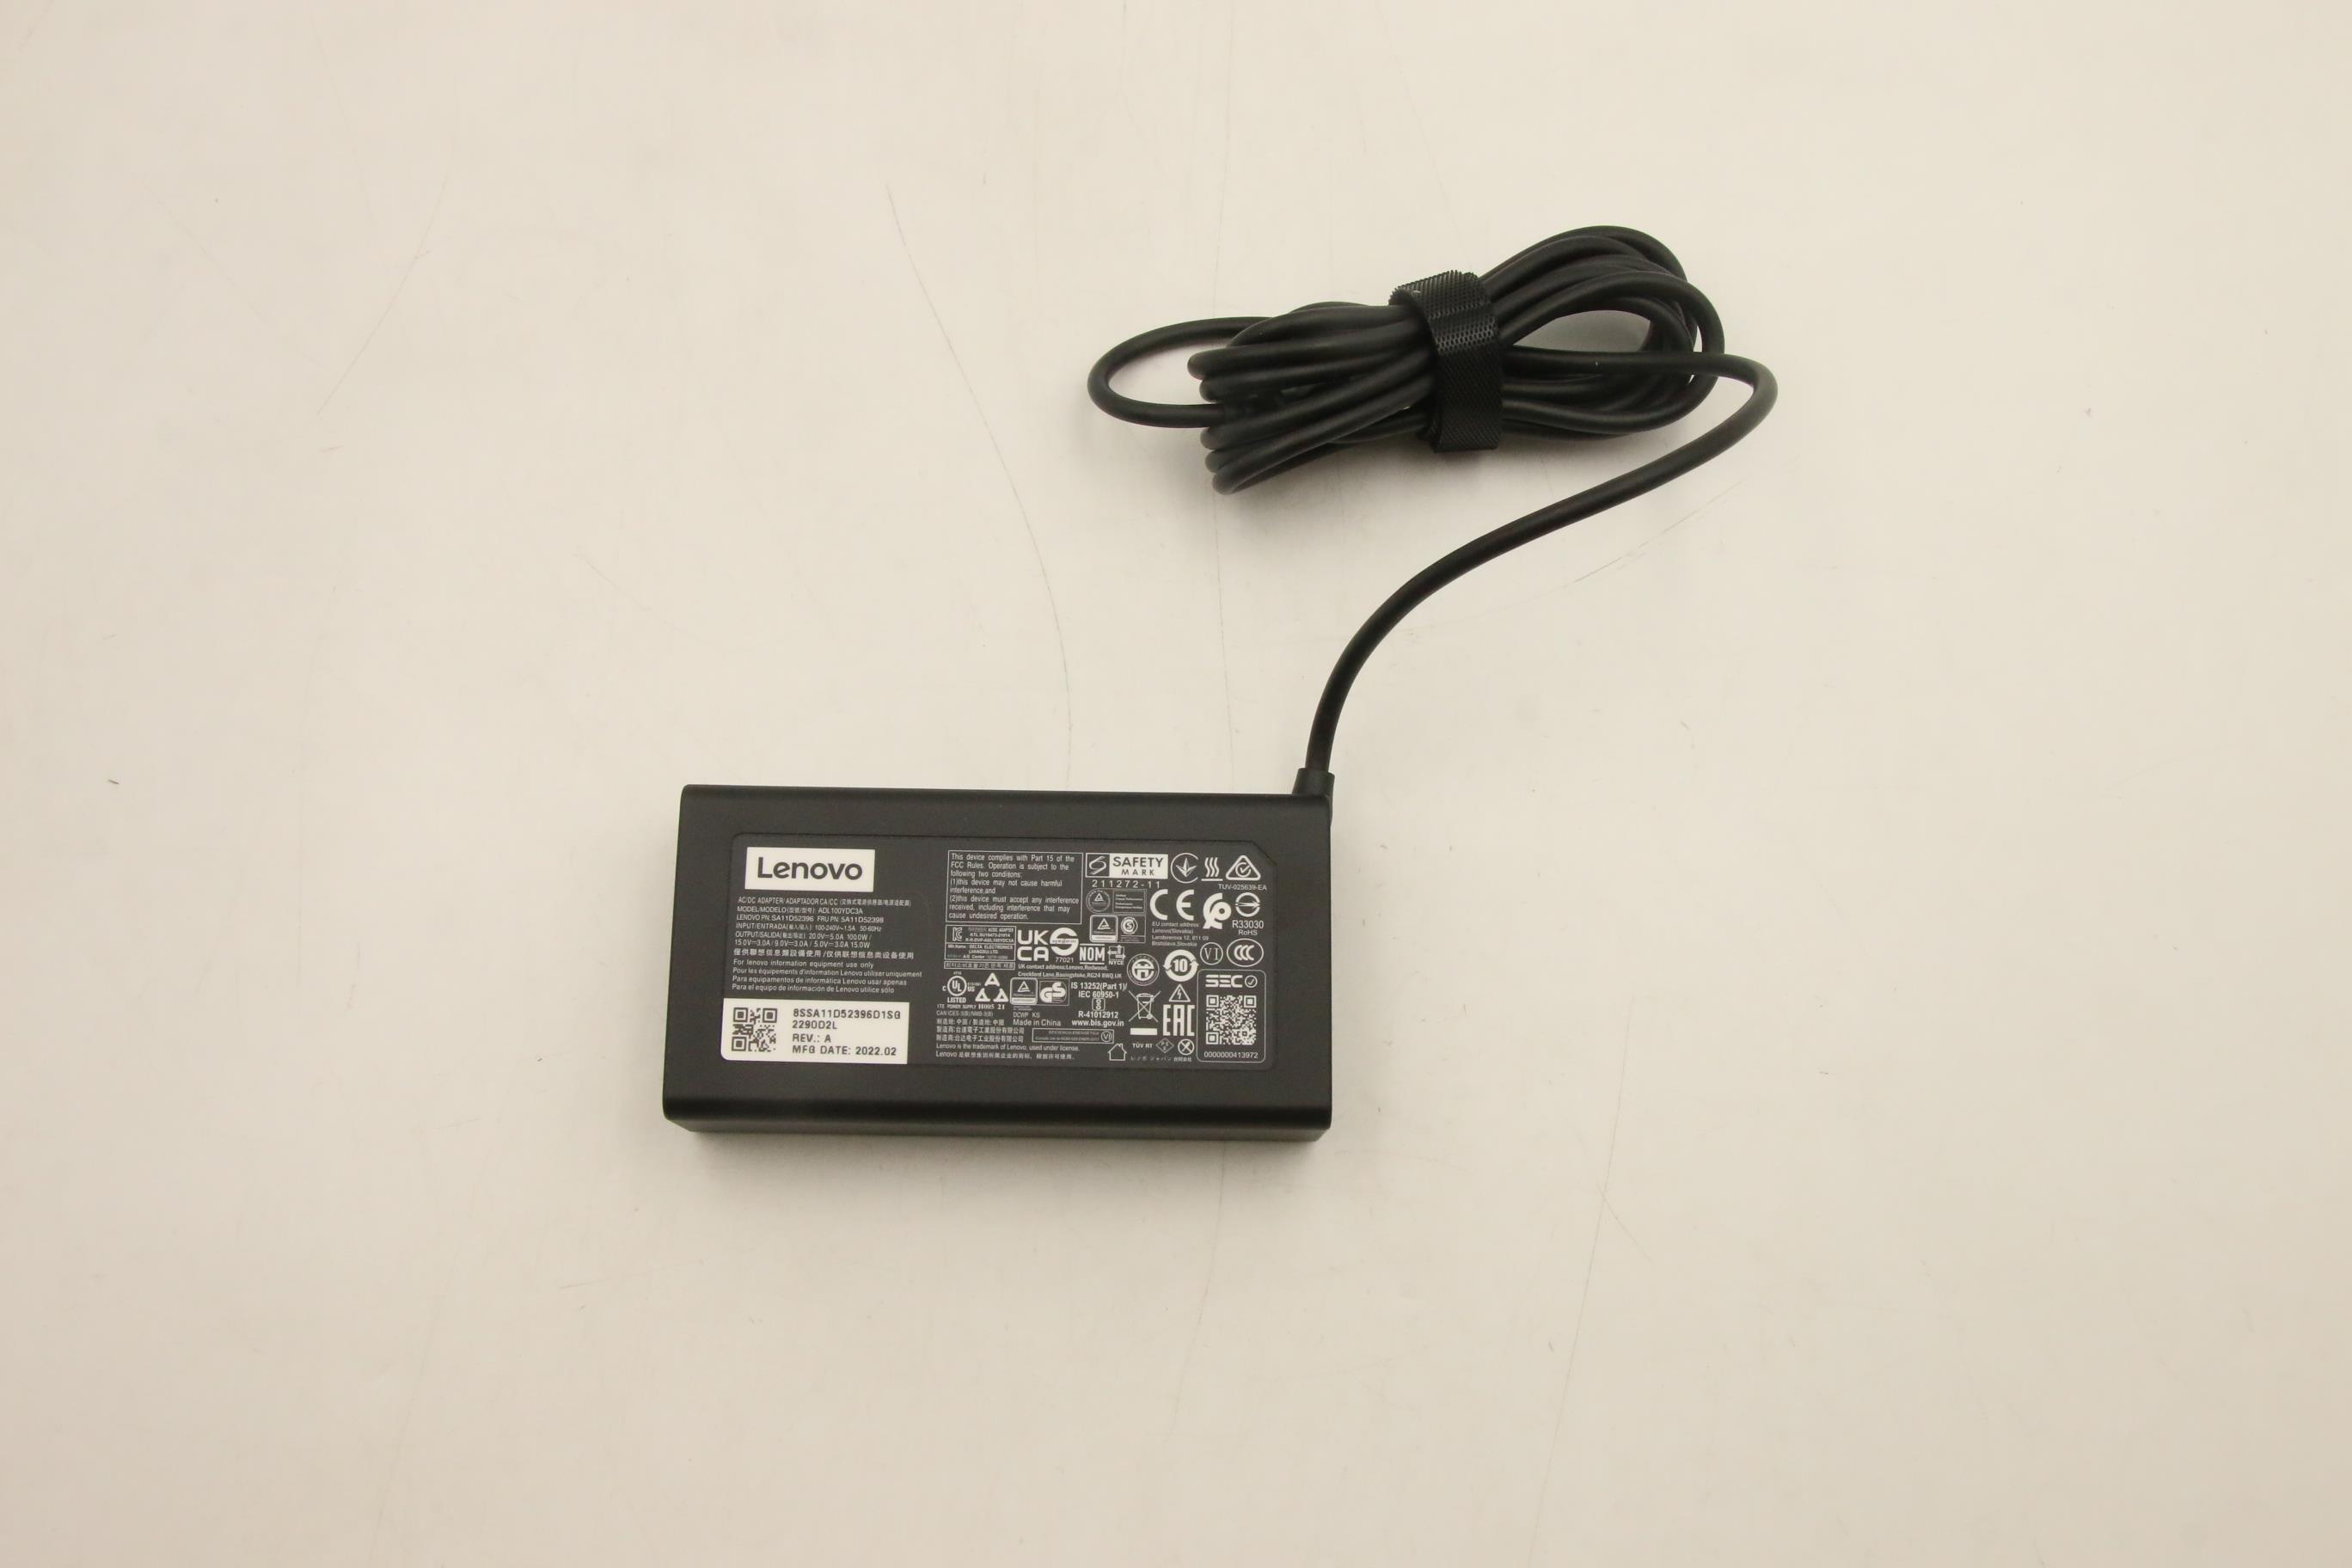 Lenovo ThinkBook 16 G4+ IAP Laptop Charger (AC Adapter) - 5A11D52398